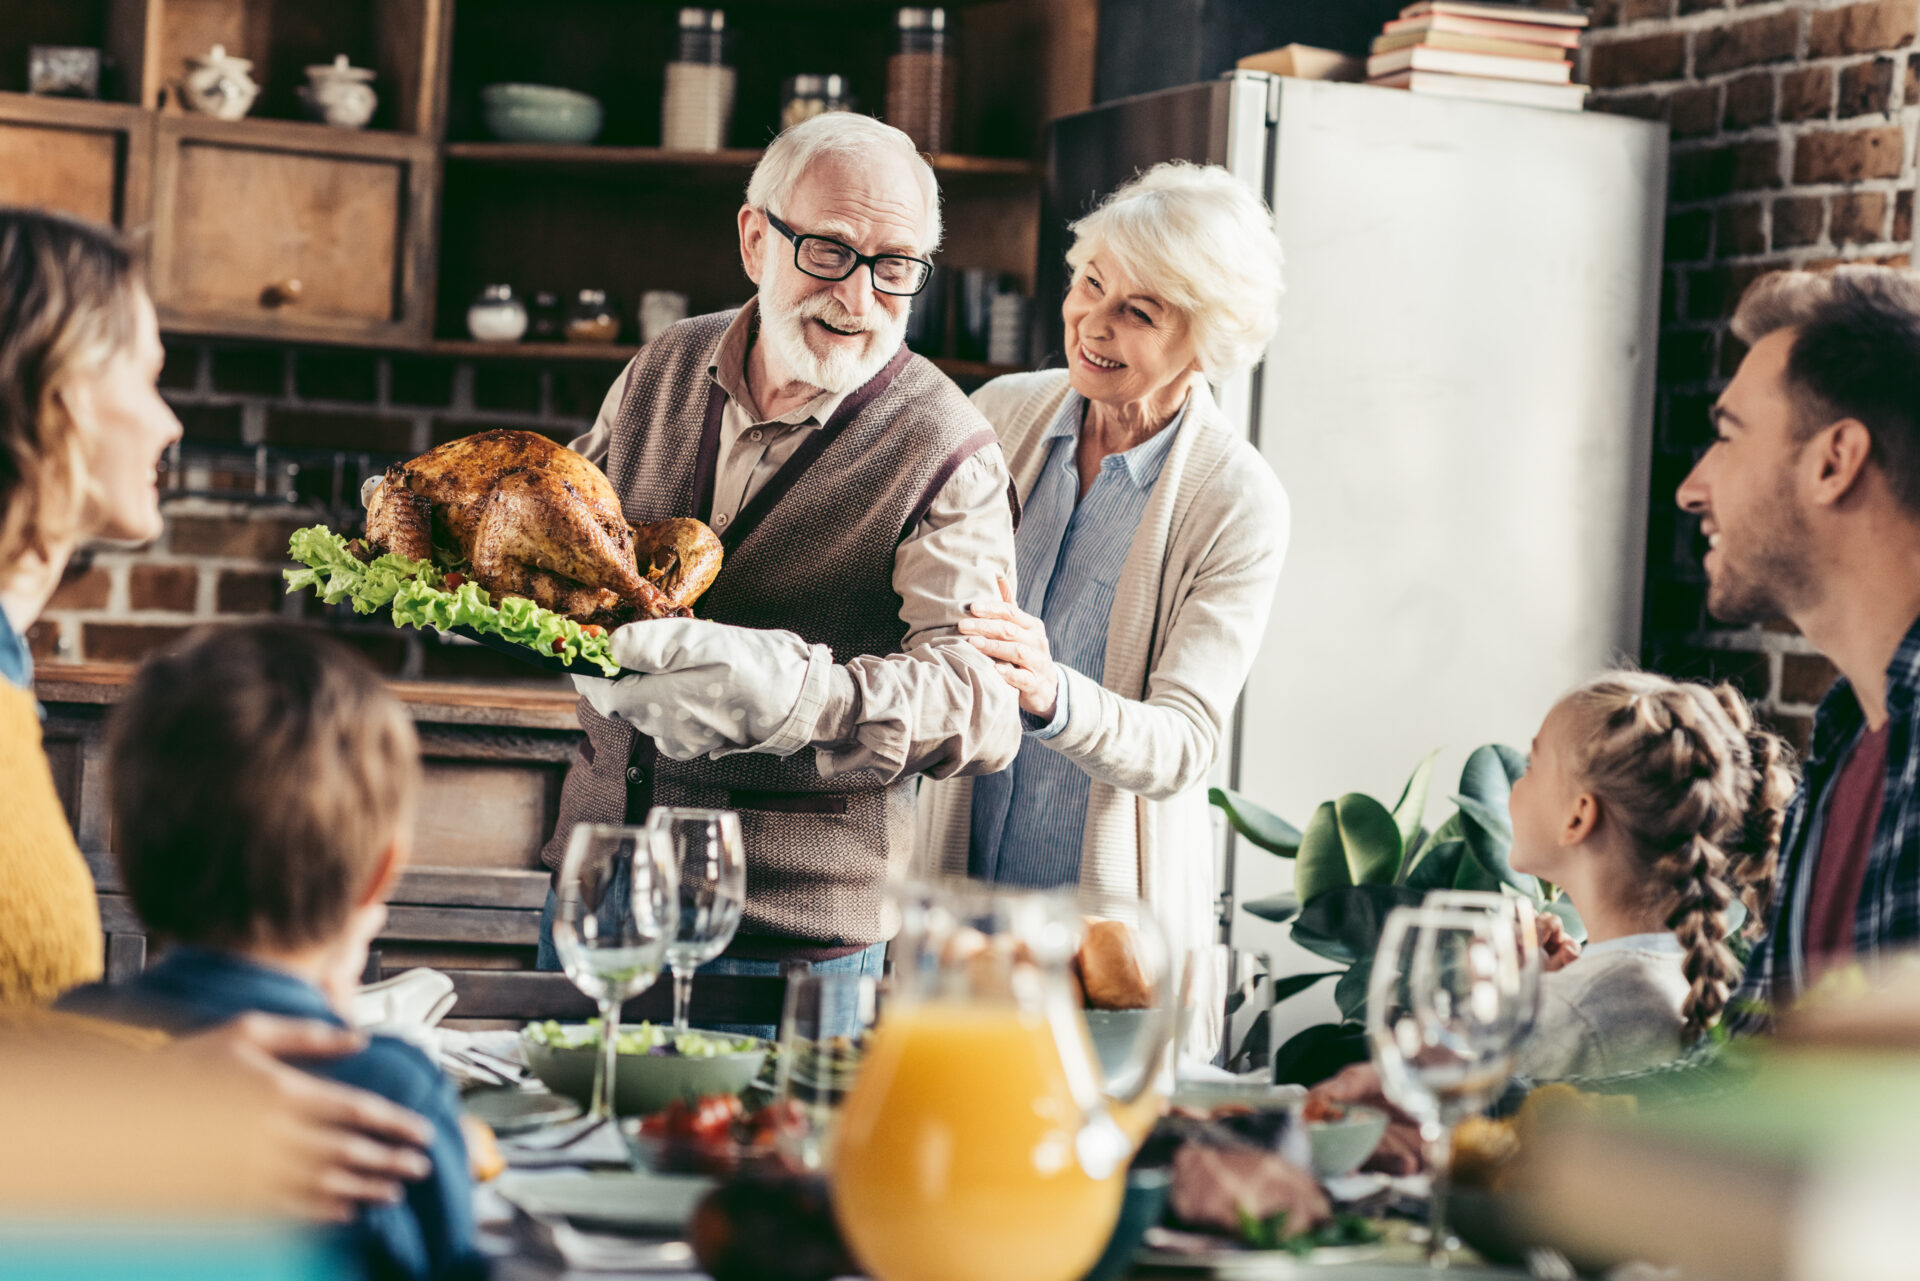 A grandfather and grandmother serve a turkey at the dinner table to their family. The elderly couple are smiling.